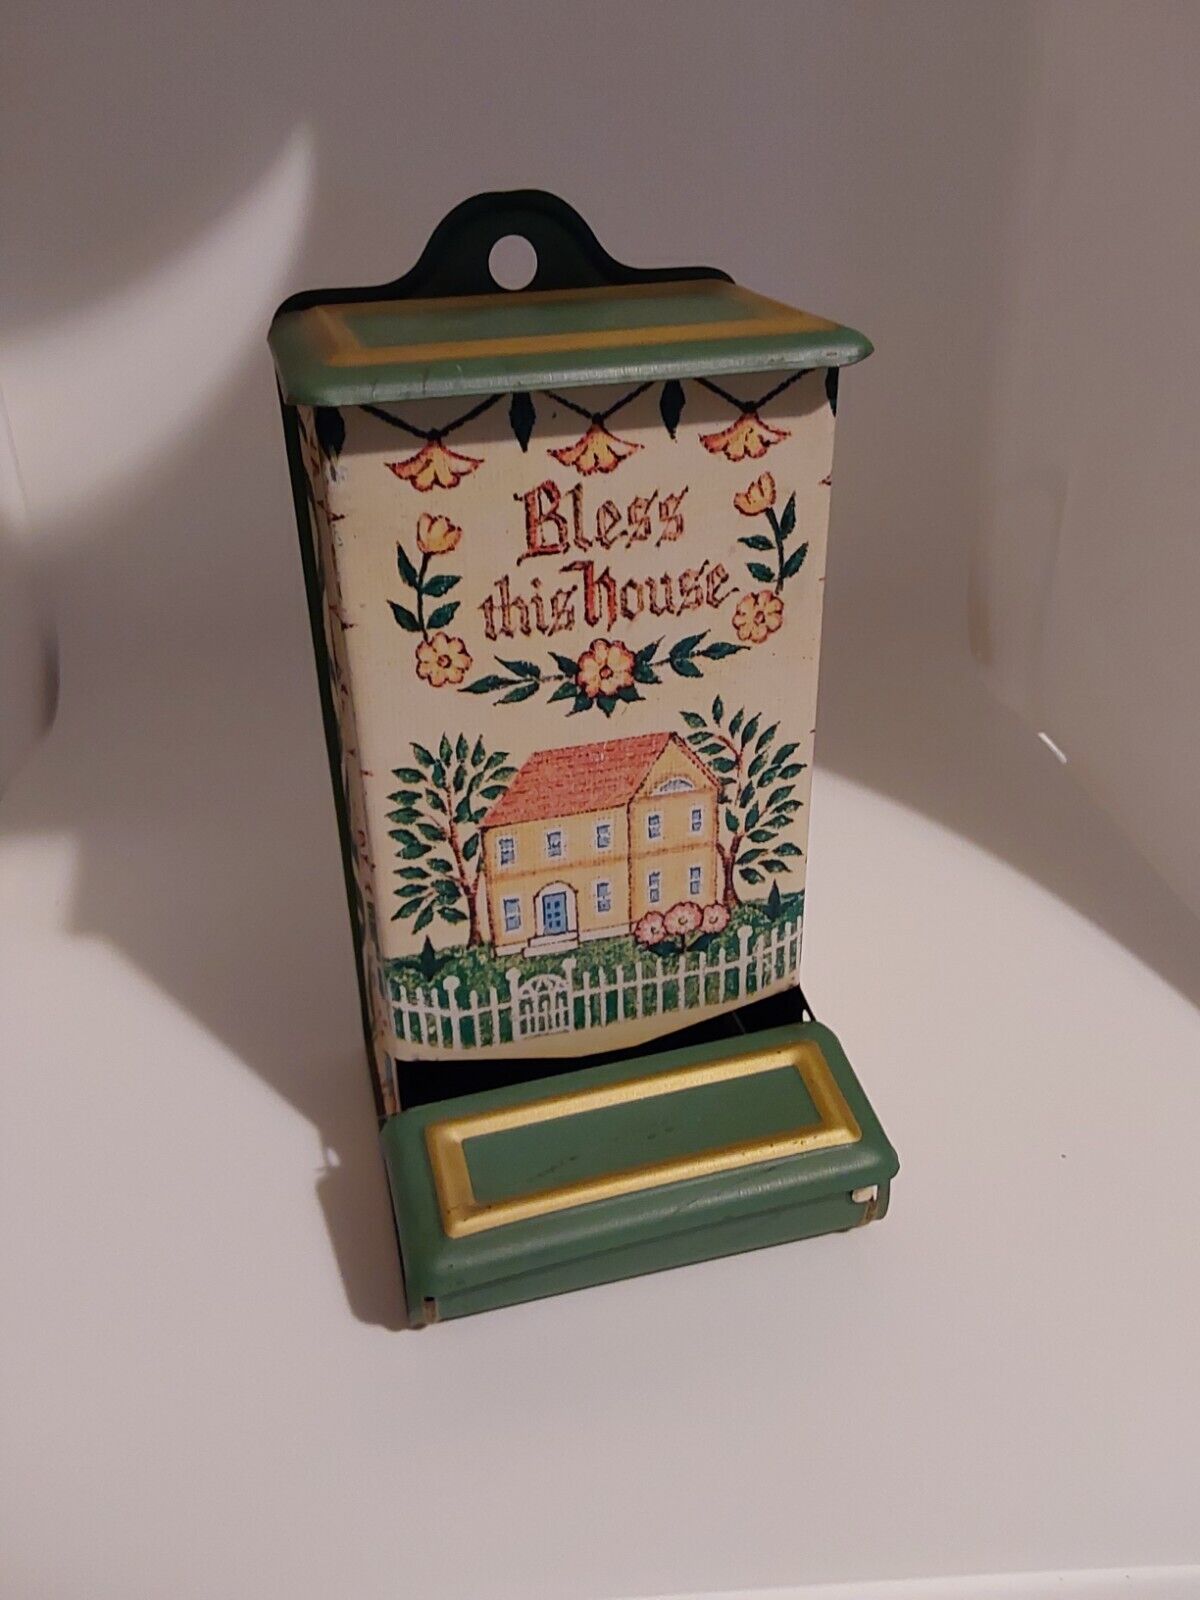 Vtg. Wall Mount Kitchen Match Holder “Bless This House” Tin, made In Hong Kong